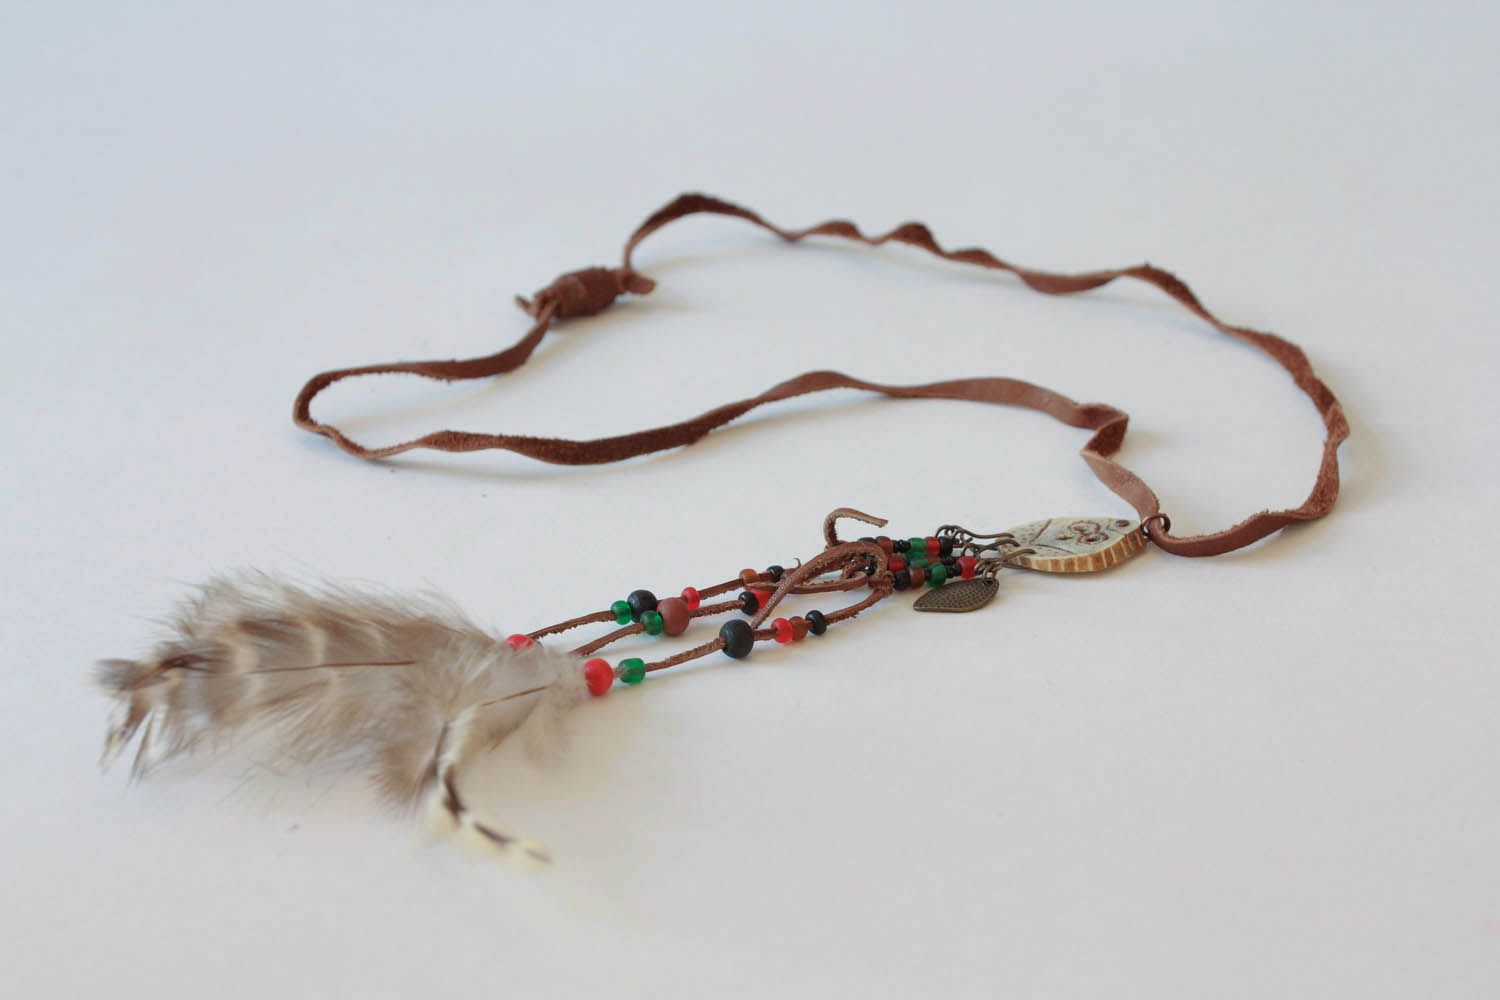 Pendant made of deer antler and feathers photo 3